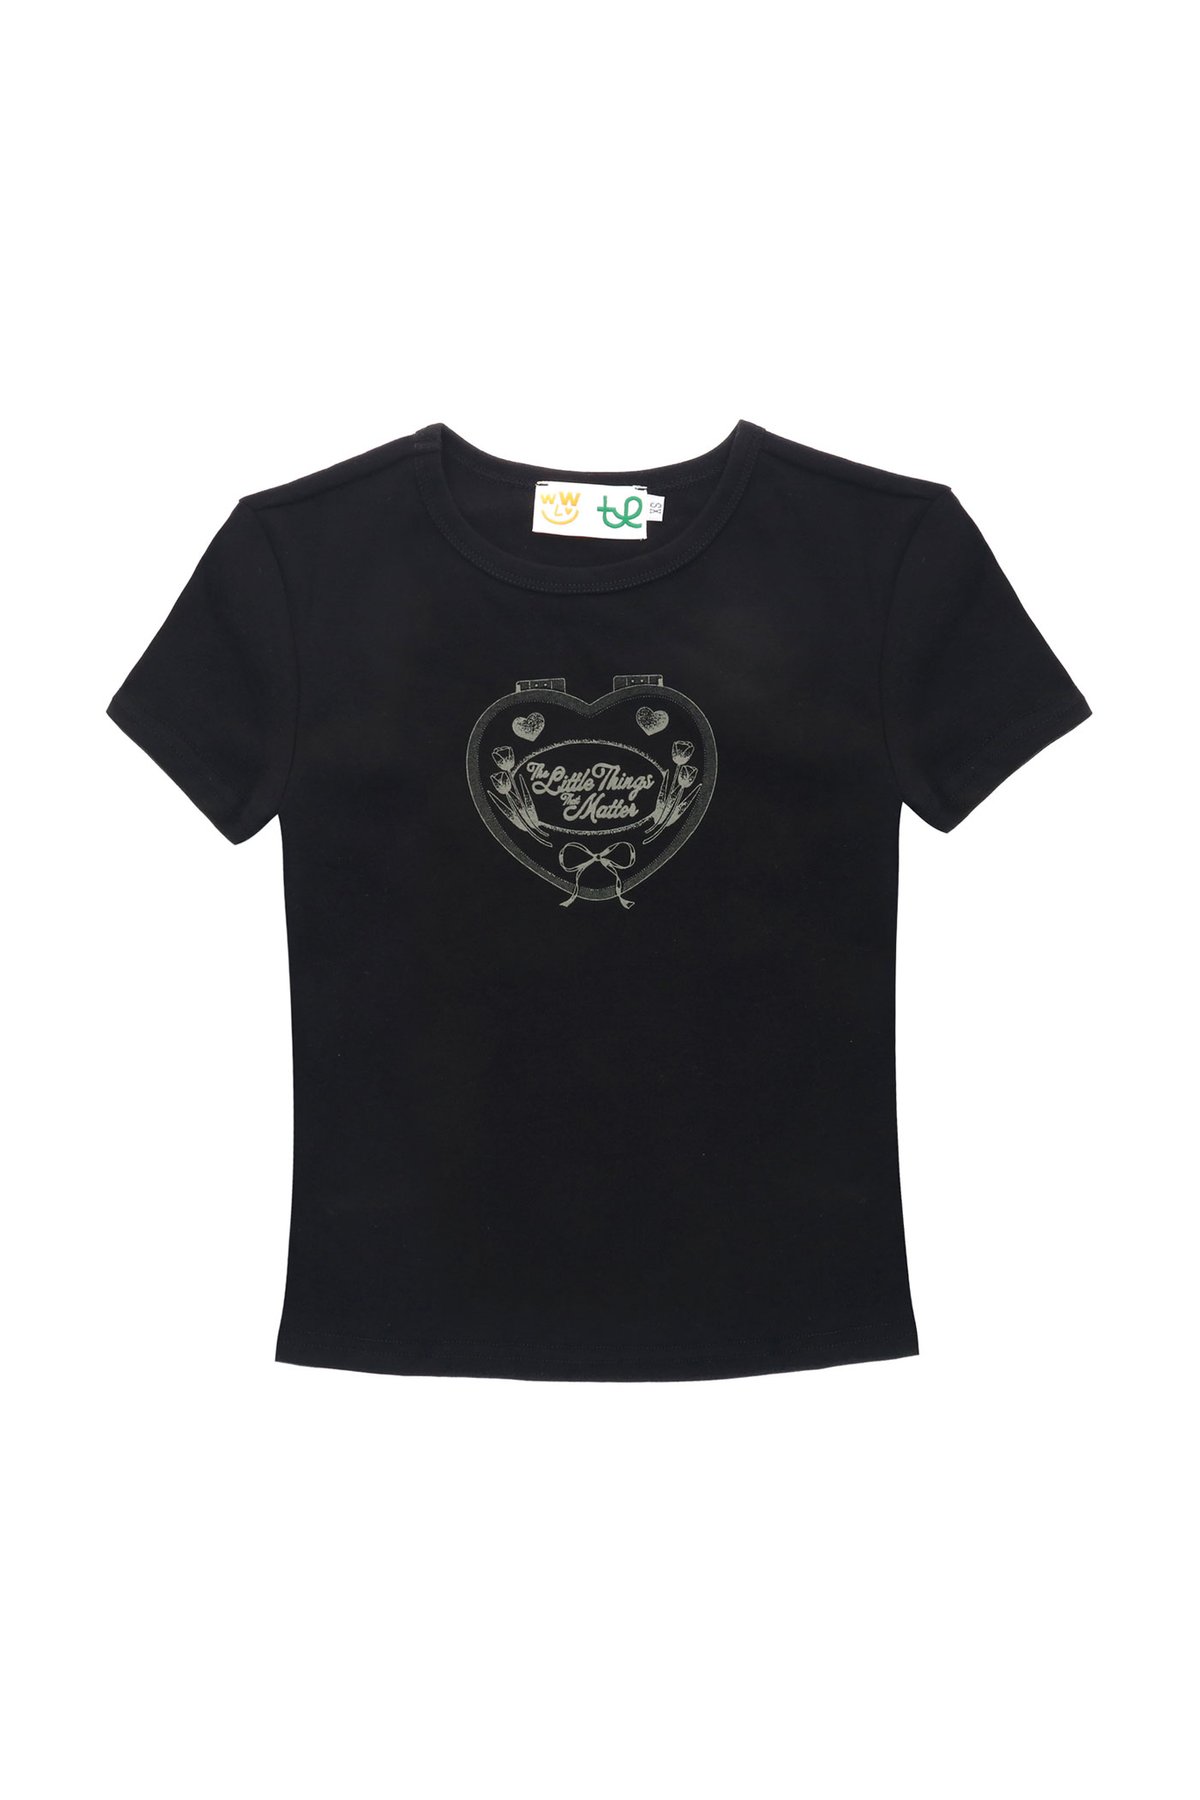 The Little Things That Matter Baby Tee (Black)